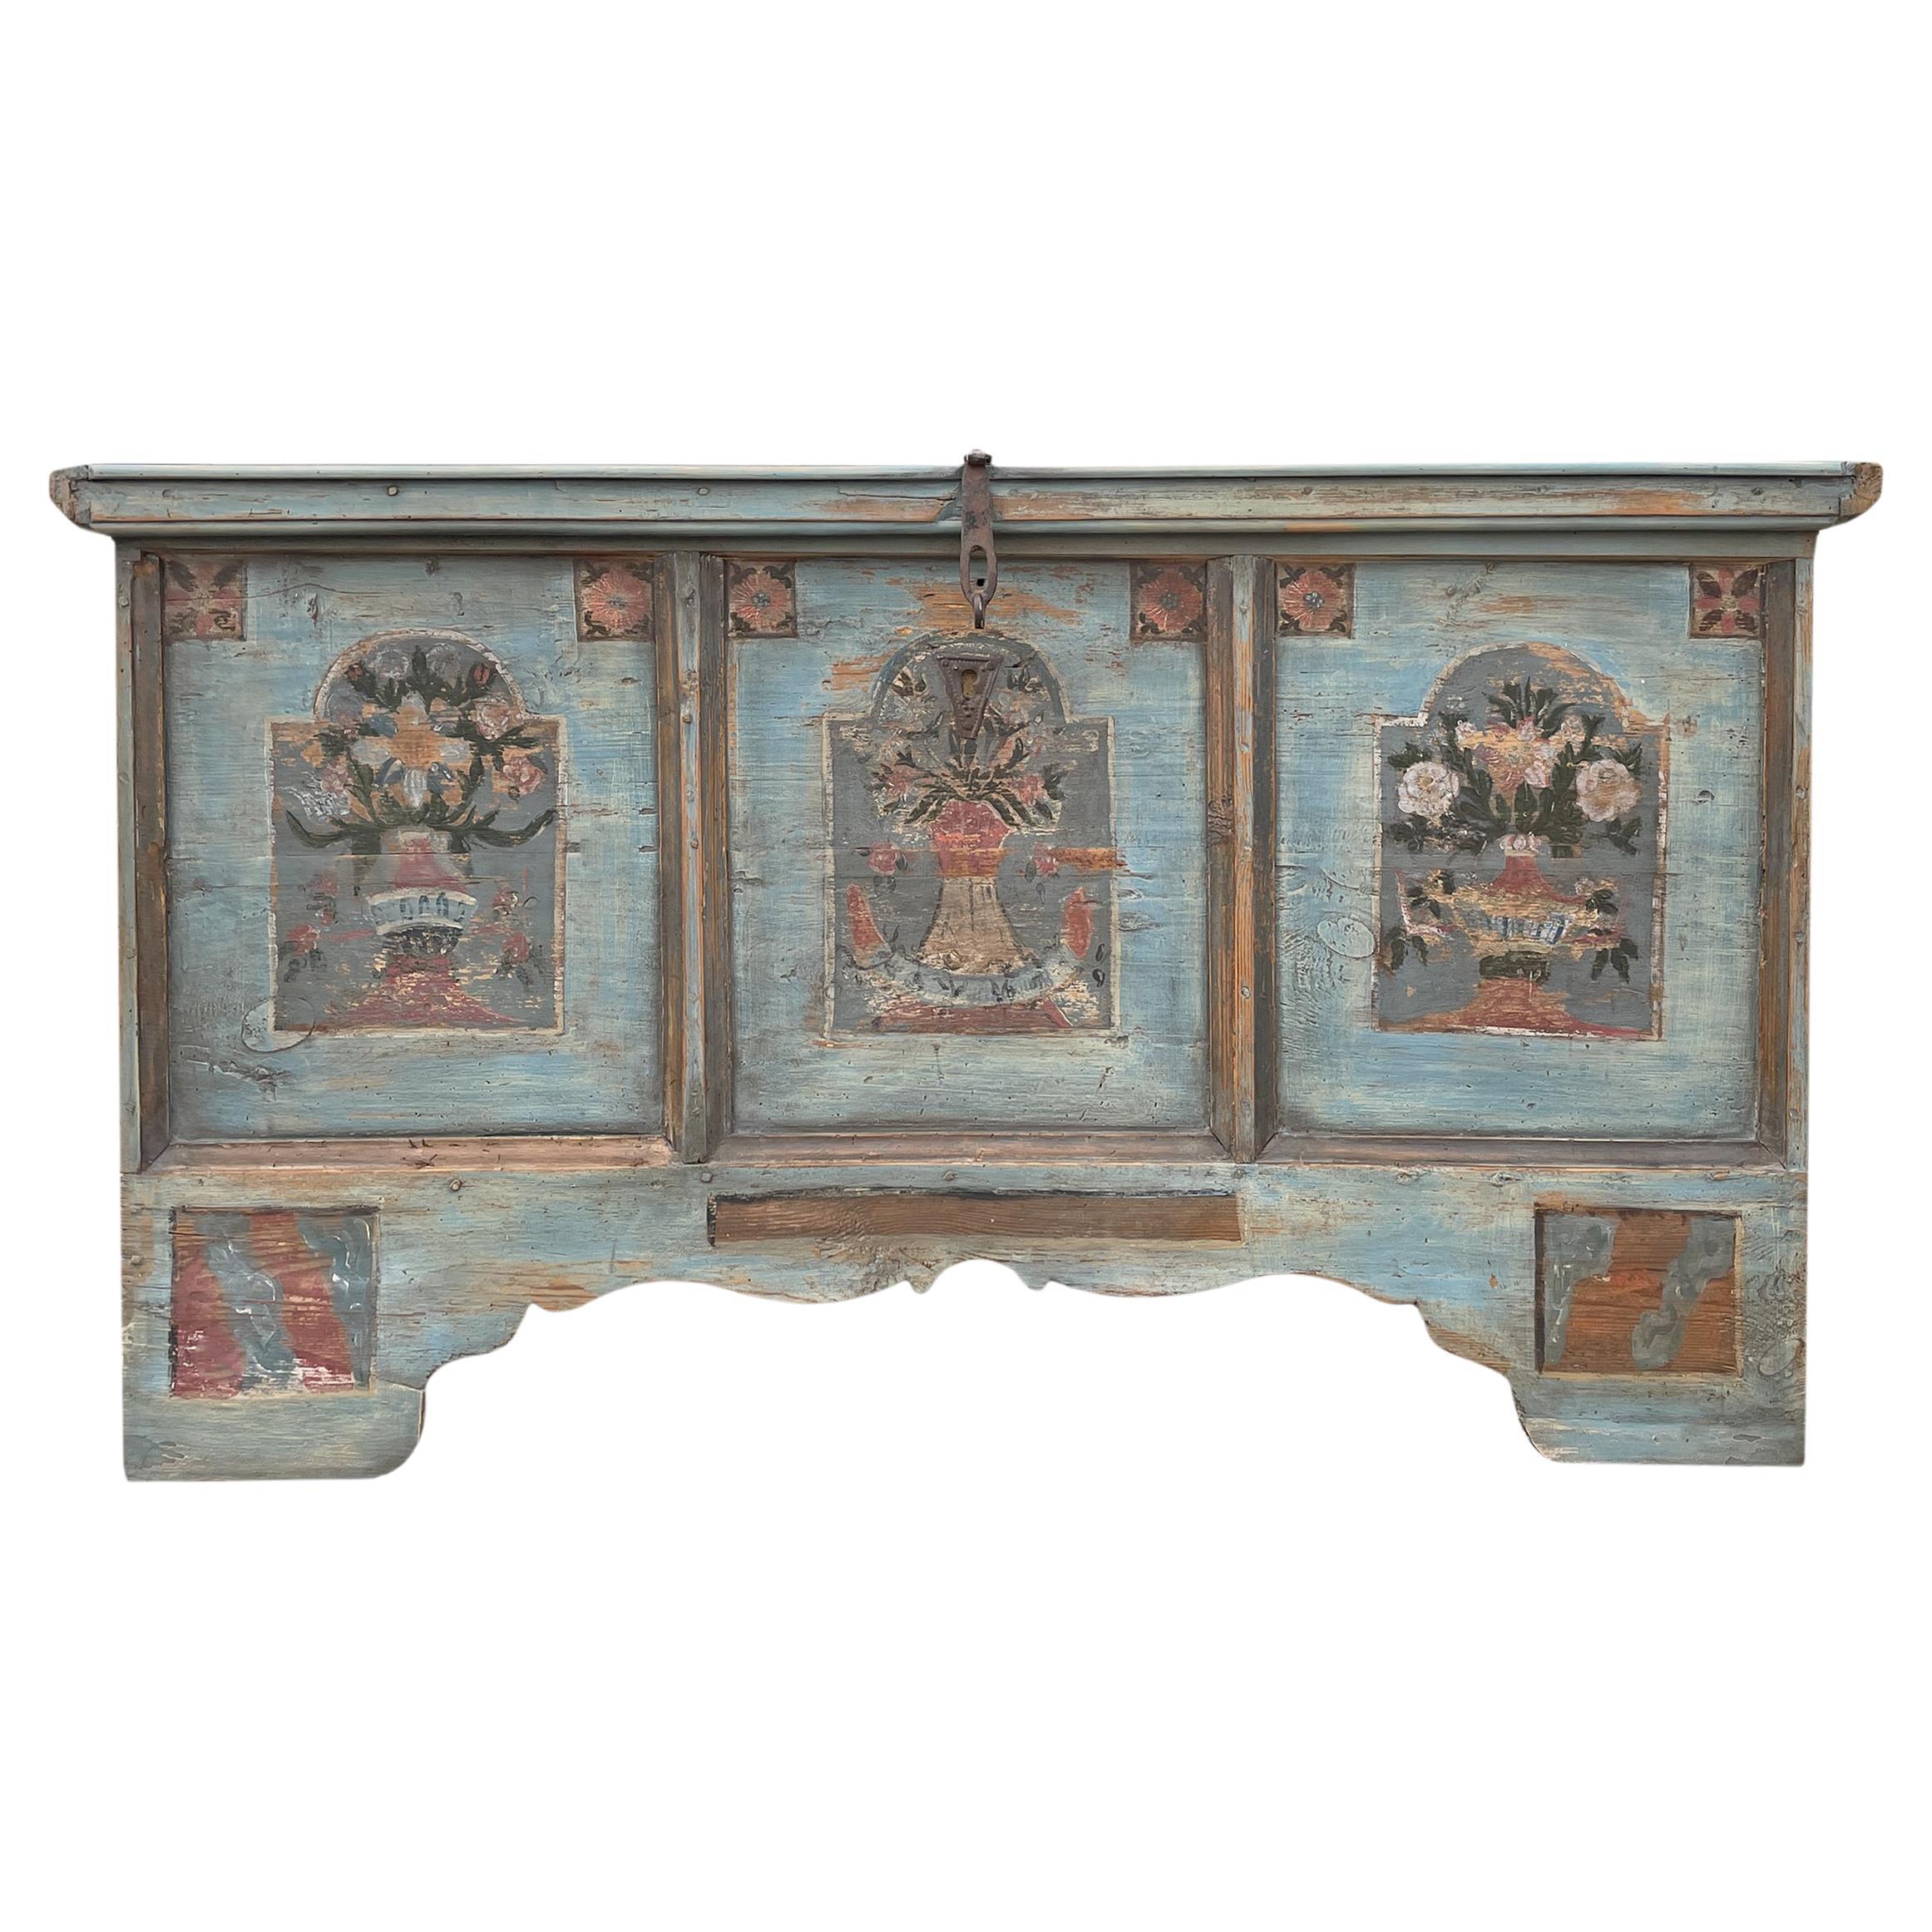 Late 18th Century Light Blu Floral Painted Blanket Chest